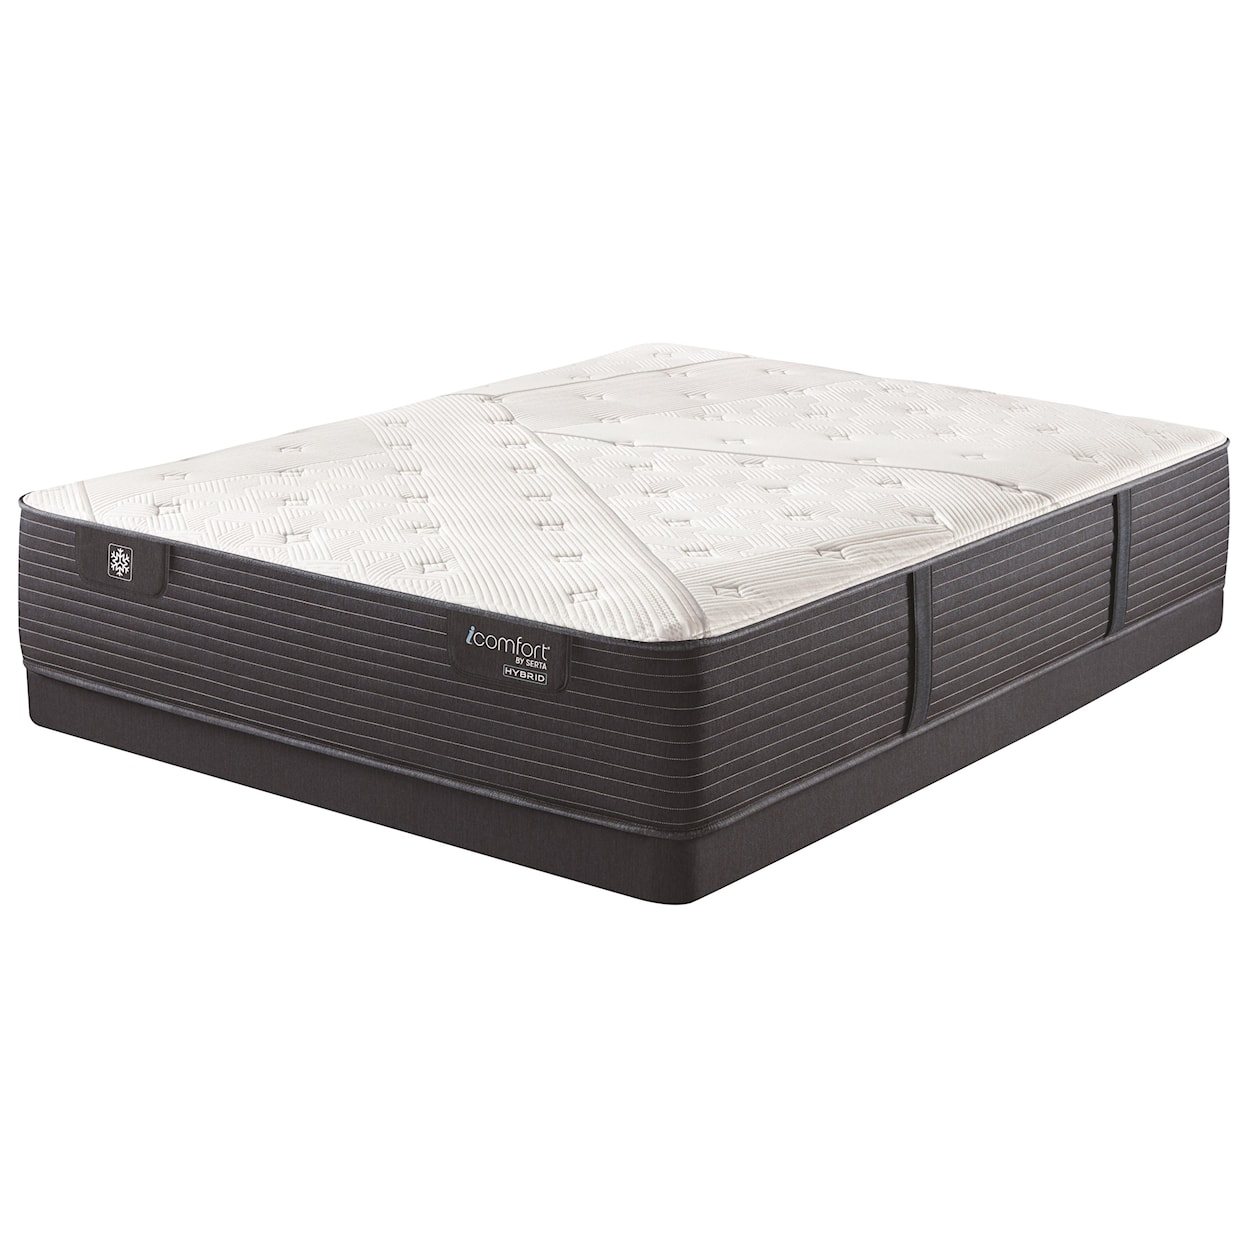 Serta CF1000 Quilted Hybrid II Firm King 13" Firm Quilted Hybrid LP Set